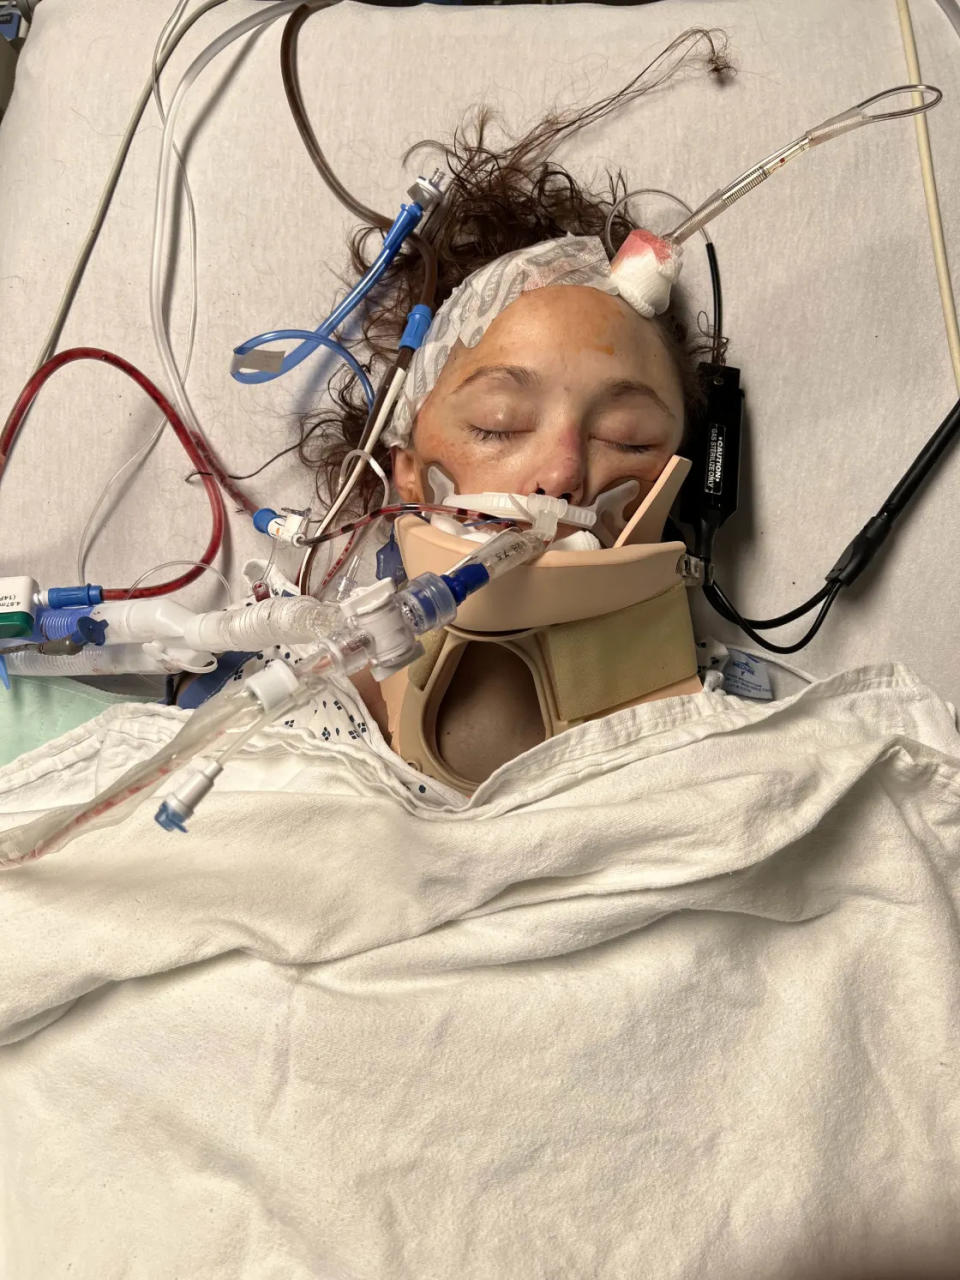 Rachel Foster had to undergo emergency surgery after an electric scooter accident left her with a catastrophic brain injury. (Credit: Rachel and John Foster) 
